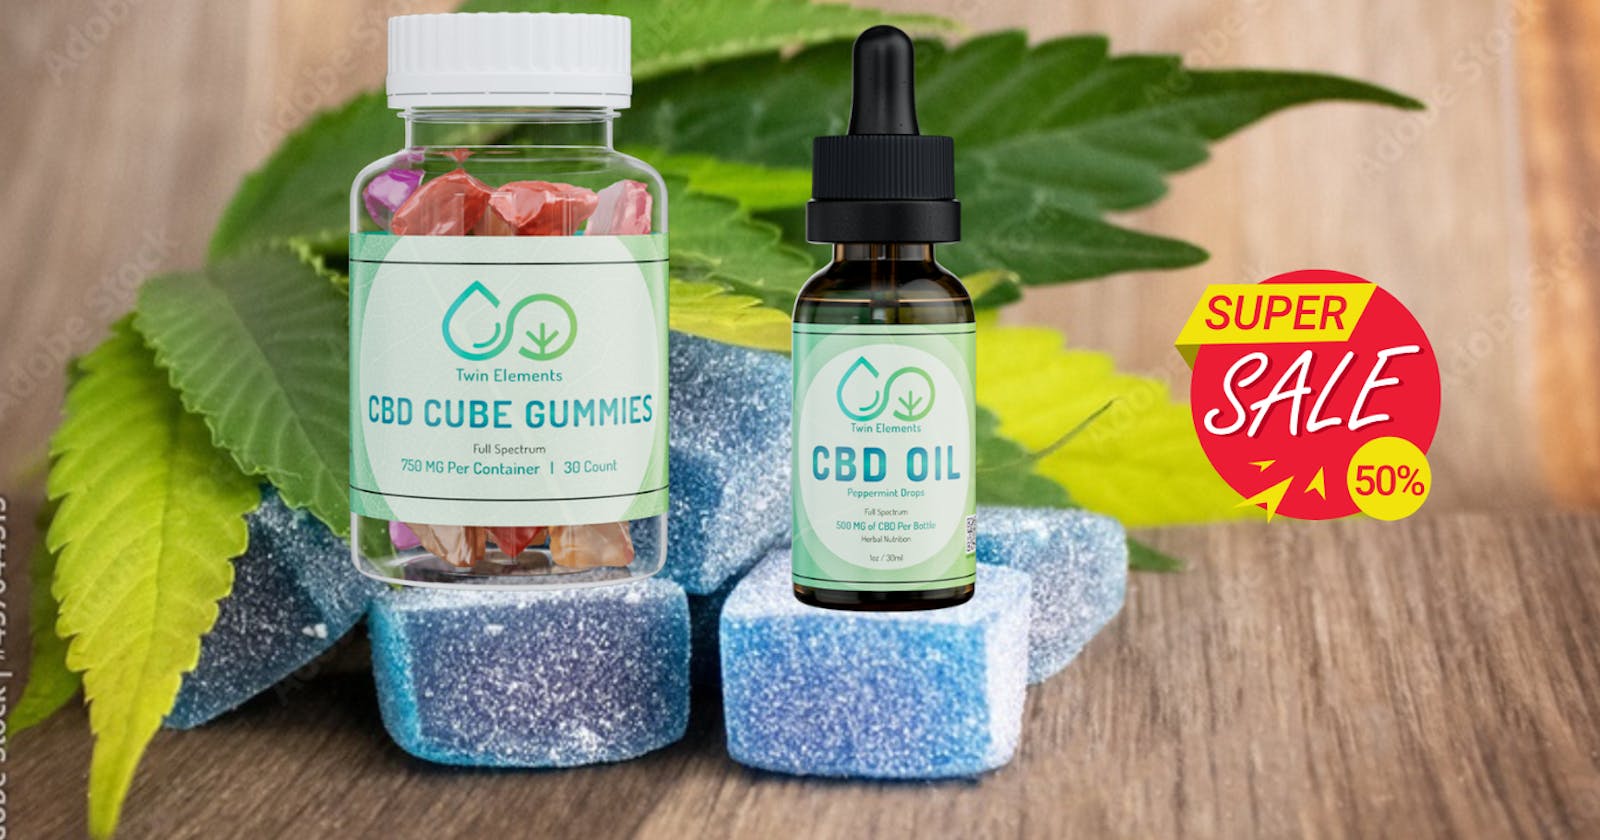 Twin Elements CBD Gummies Review - Is It Worth Buying?